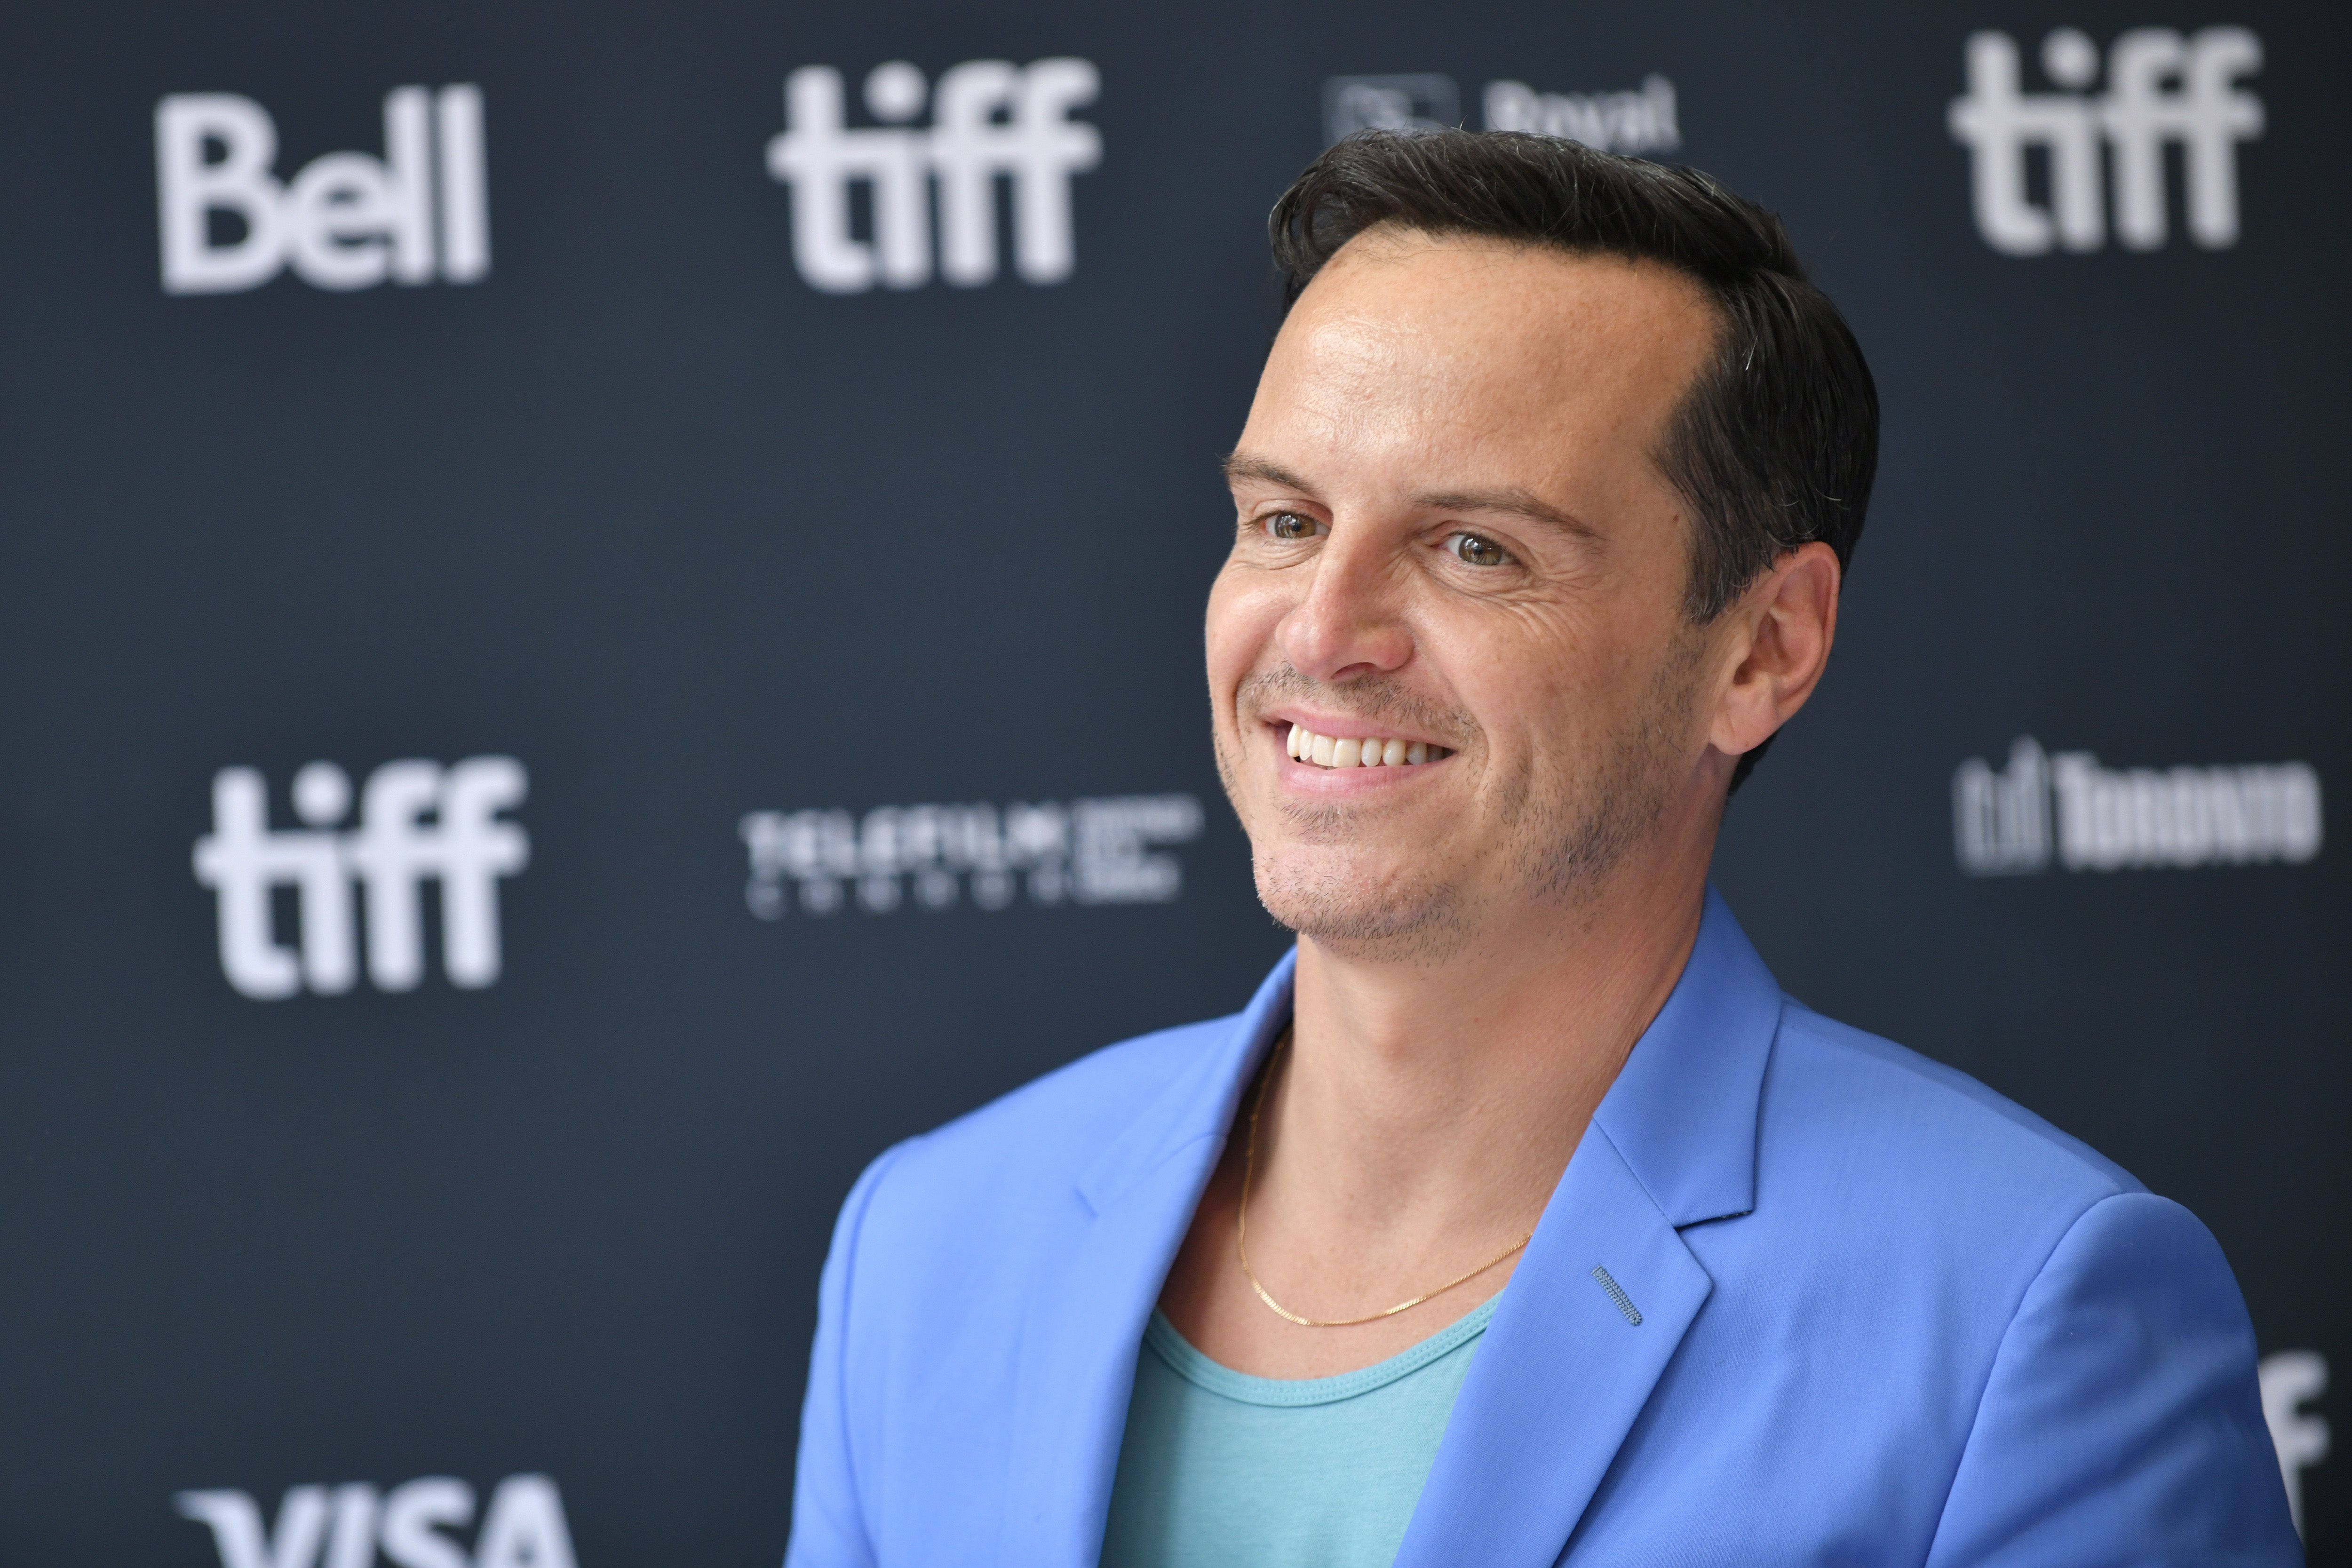 If the formidable Andrew Scott has a punter sending emails on their laptop during the most famous soliloquy in history – Hamlet’s ‘To be or not to be’ – then what hope do the rest of us have?